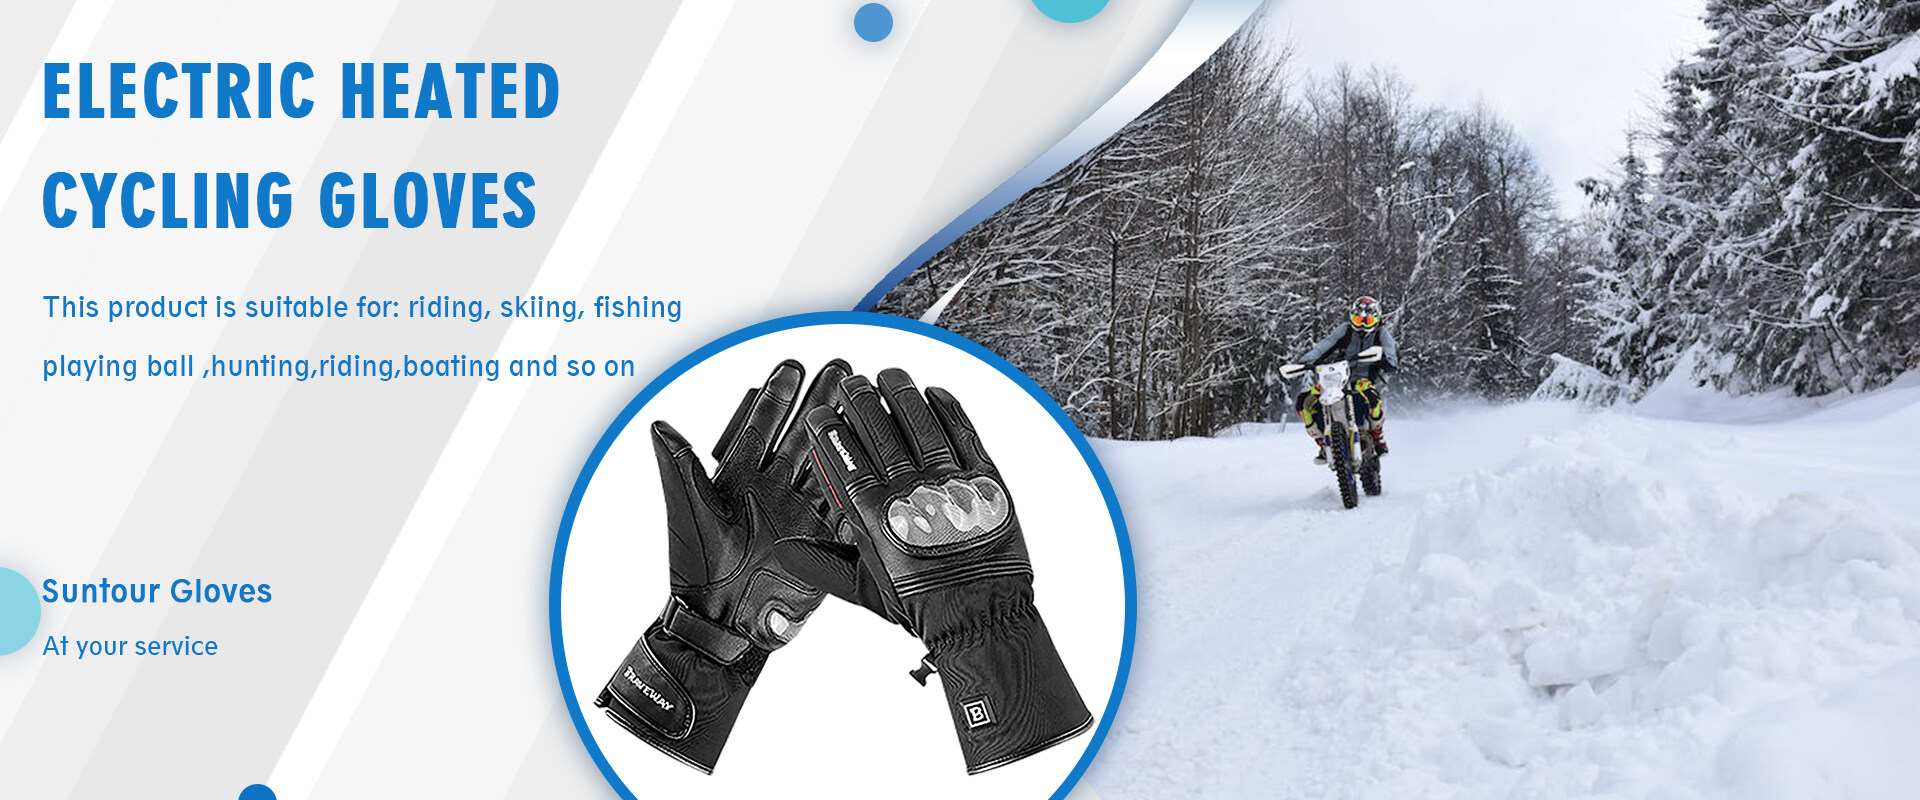 cheap snowboard gloves,skeleton snowboard gloves,clearance snowboard gloves,best snowboard gloves with wrist protection,custom snowboard gloves